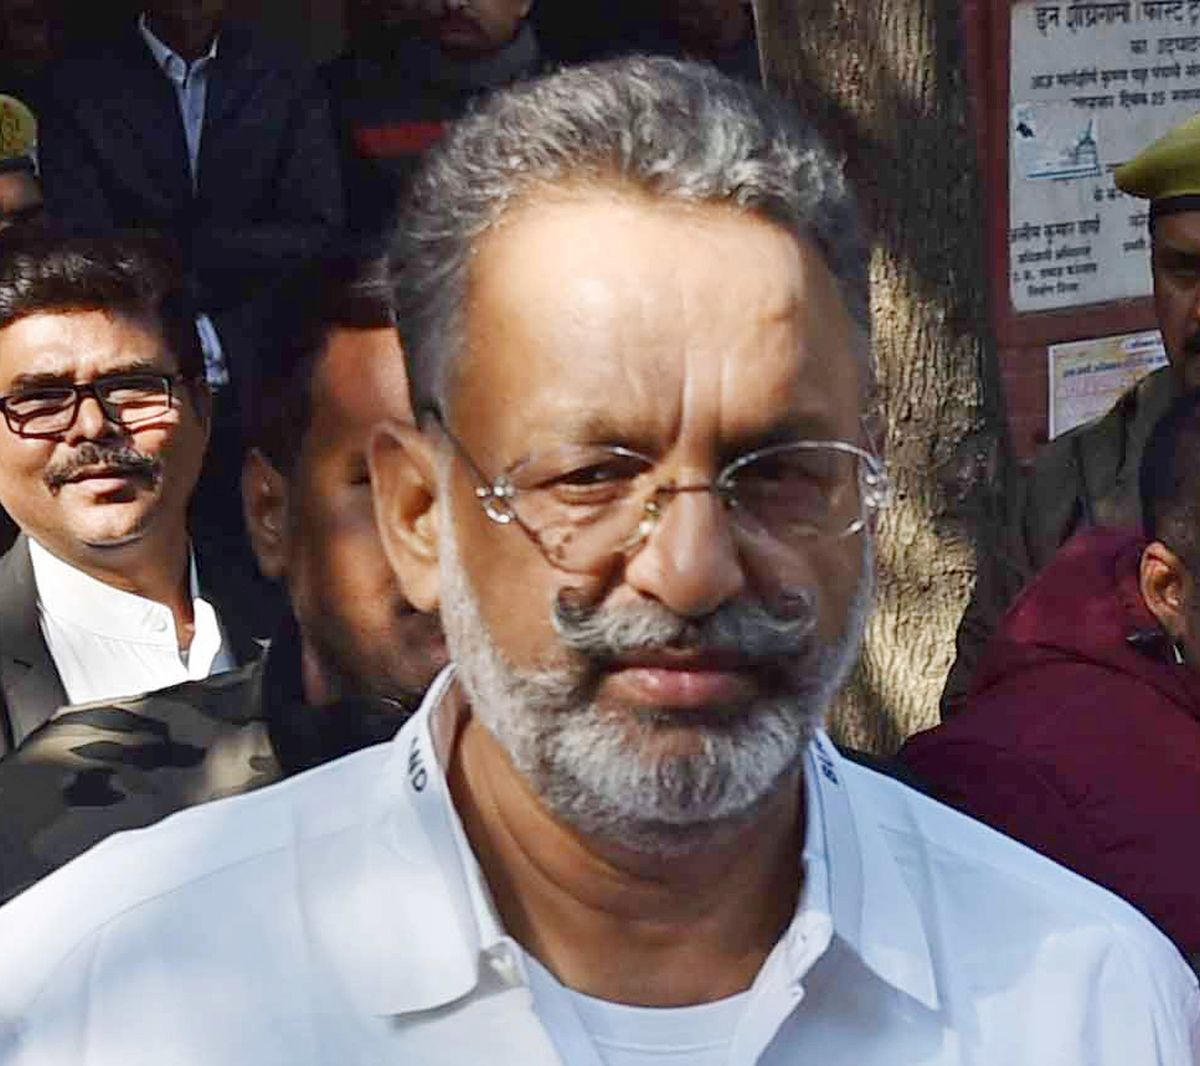 UP court orders magisterial probe into Mukhtar Ansari's death